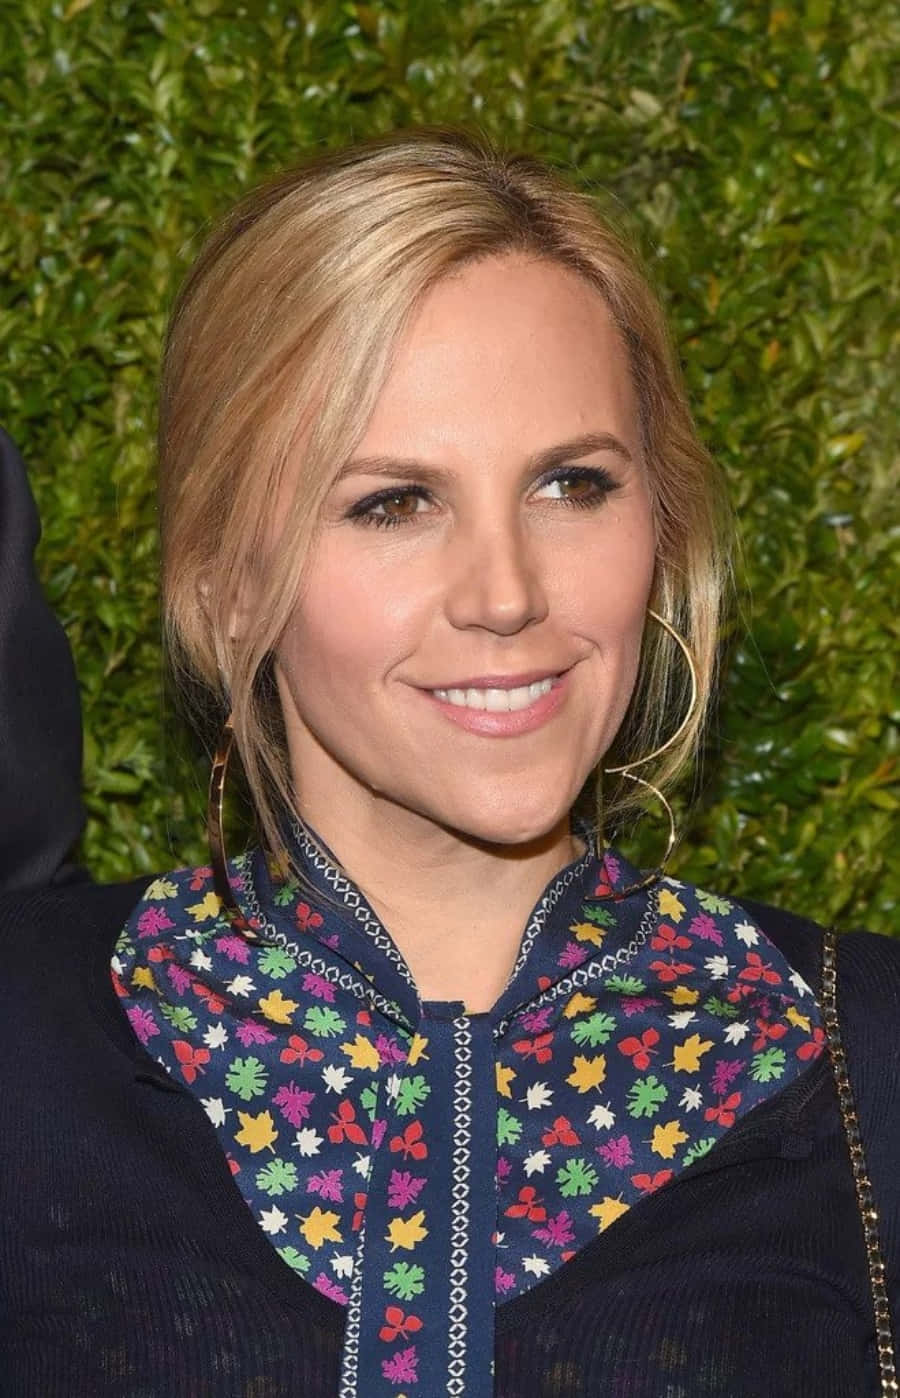 Download Tory Burch Pictures | Wallpapers.com